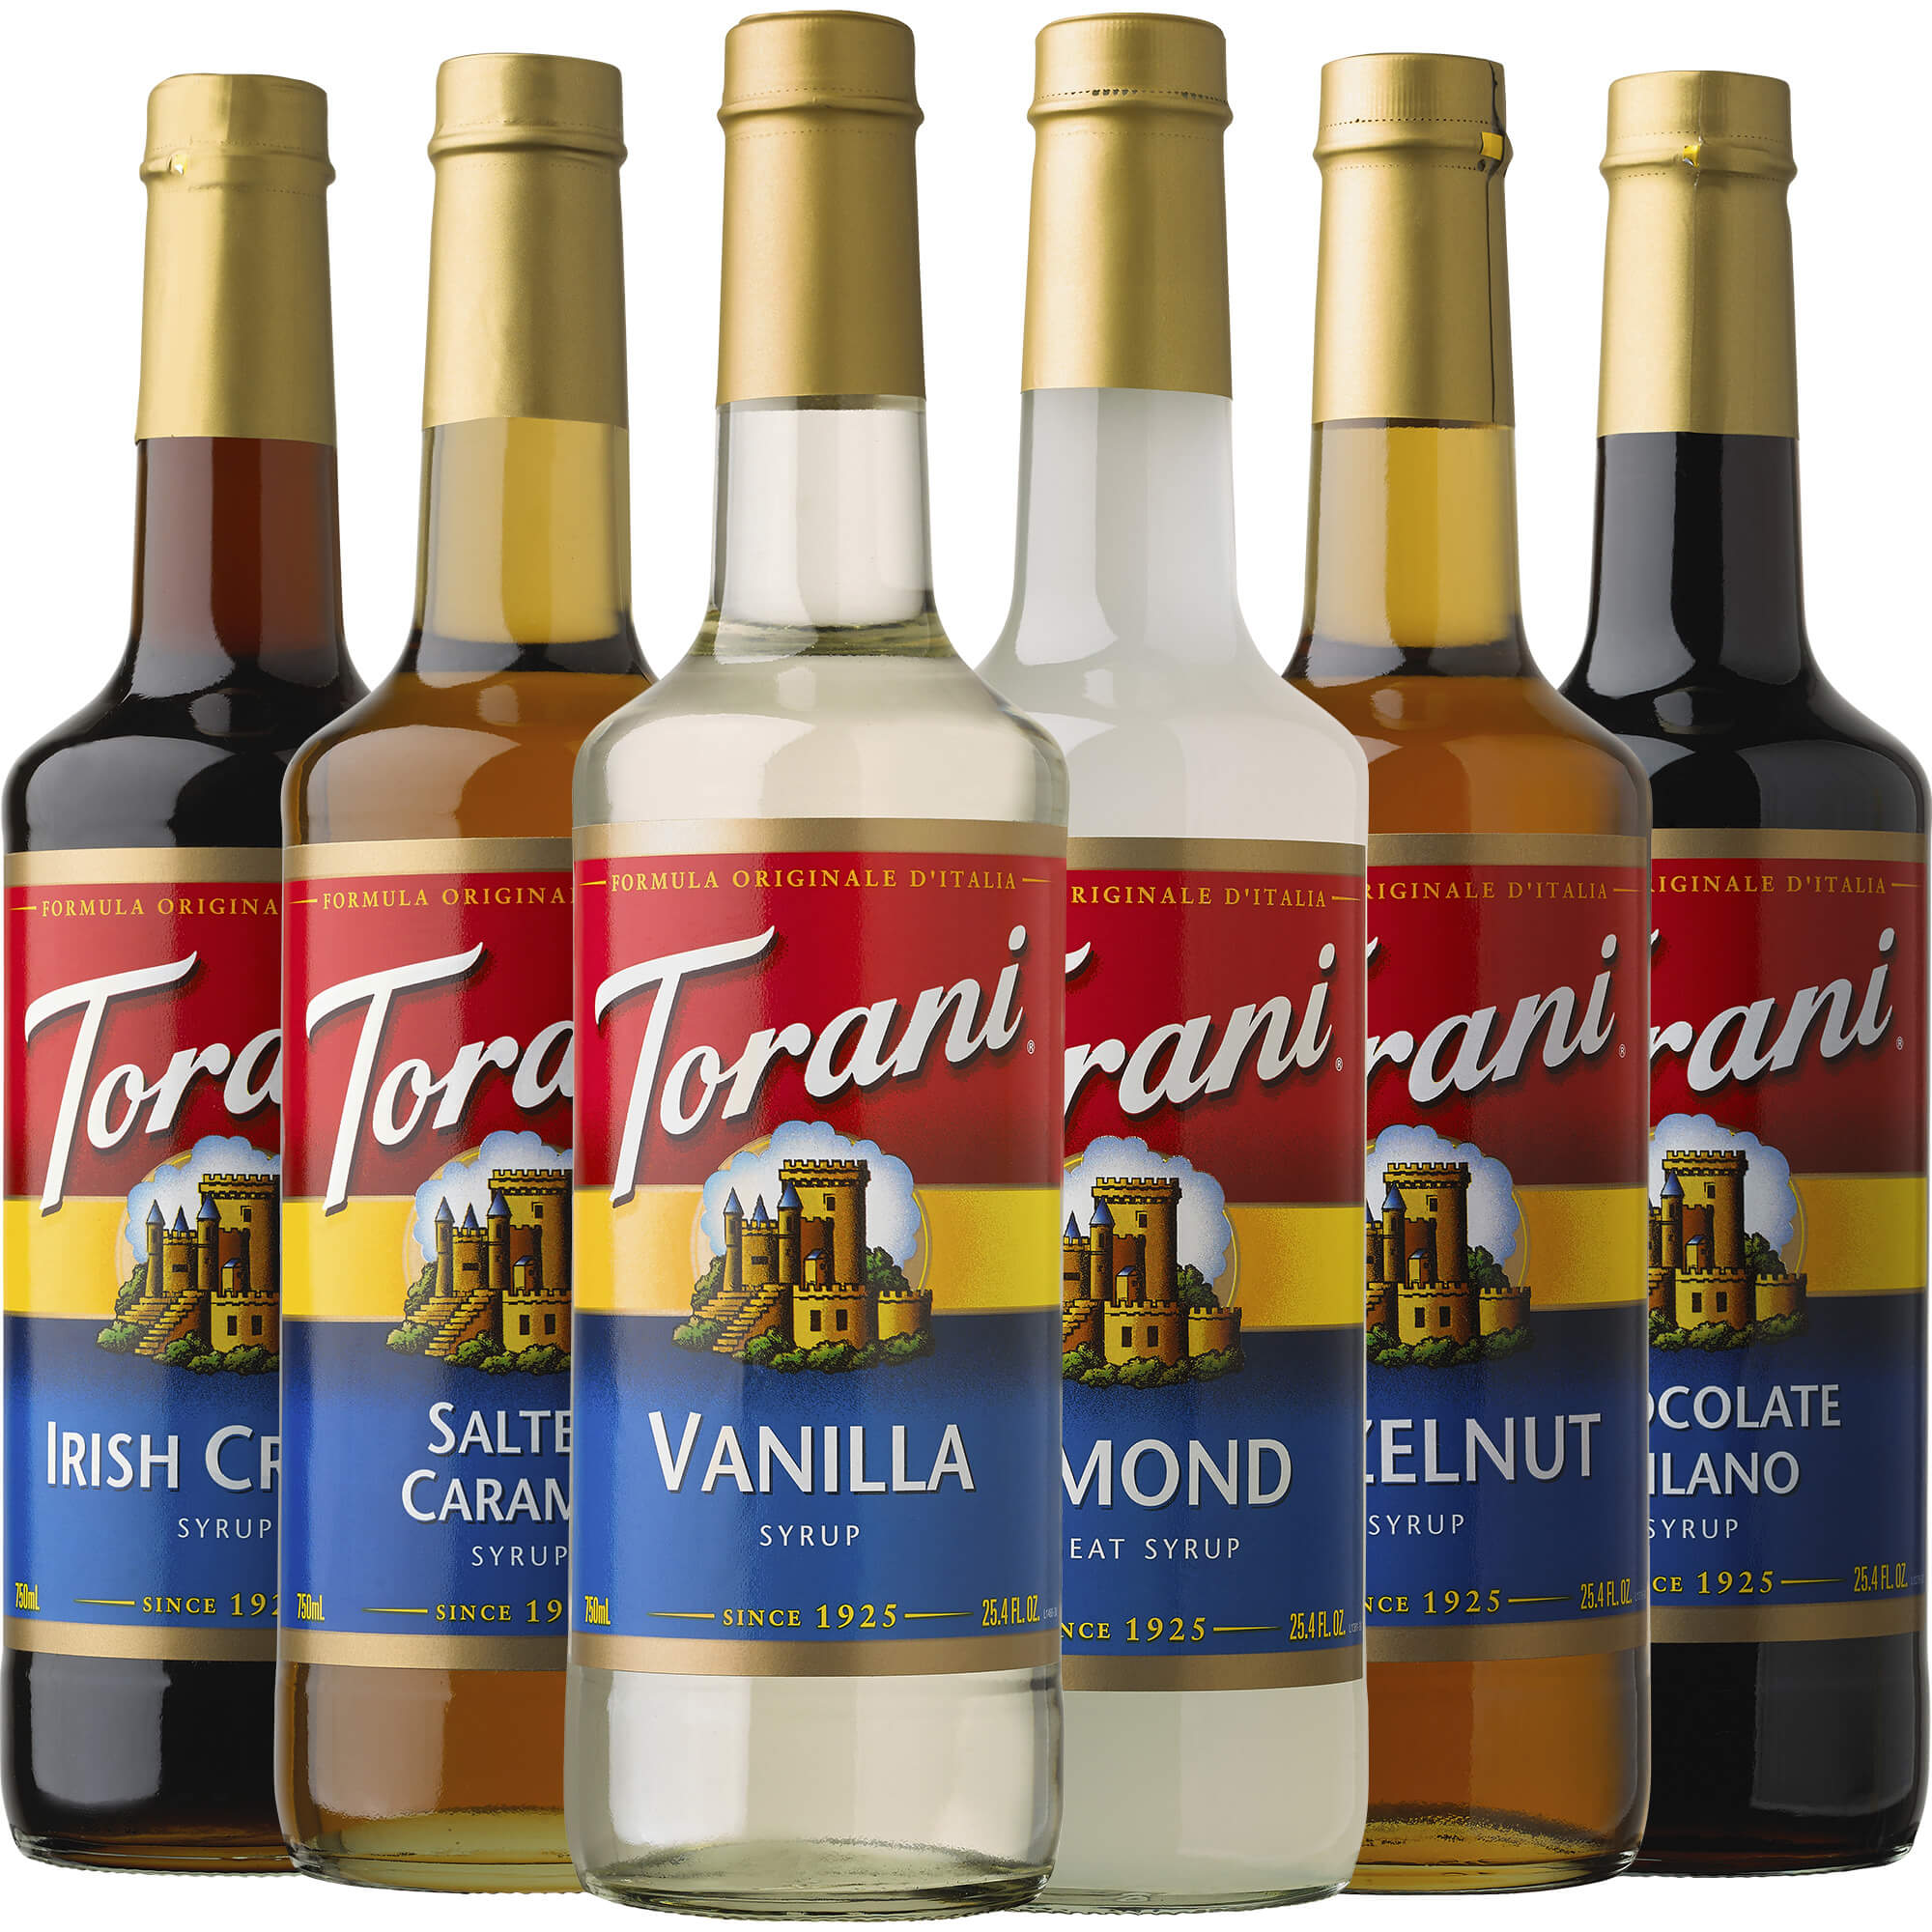 15 Torani Syrup Flavors For Coffee, Ranked Worst To Best